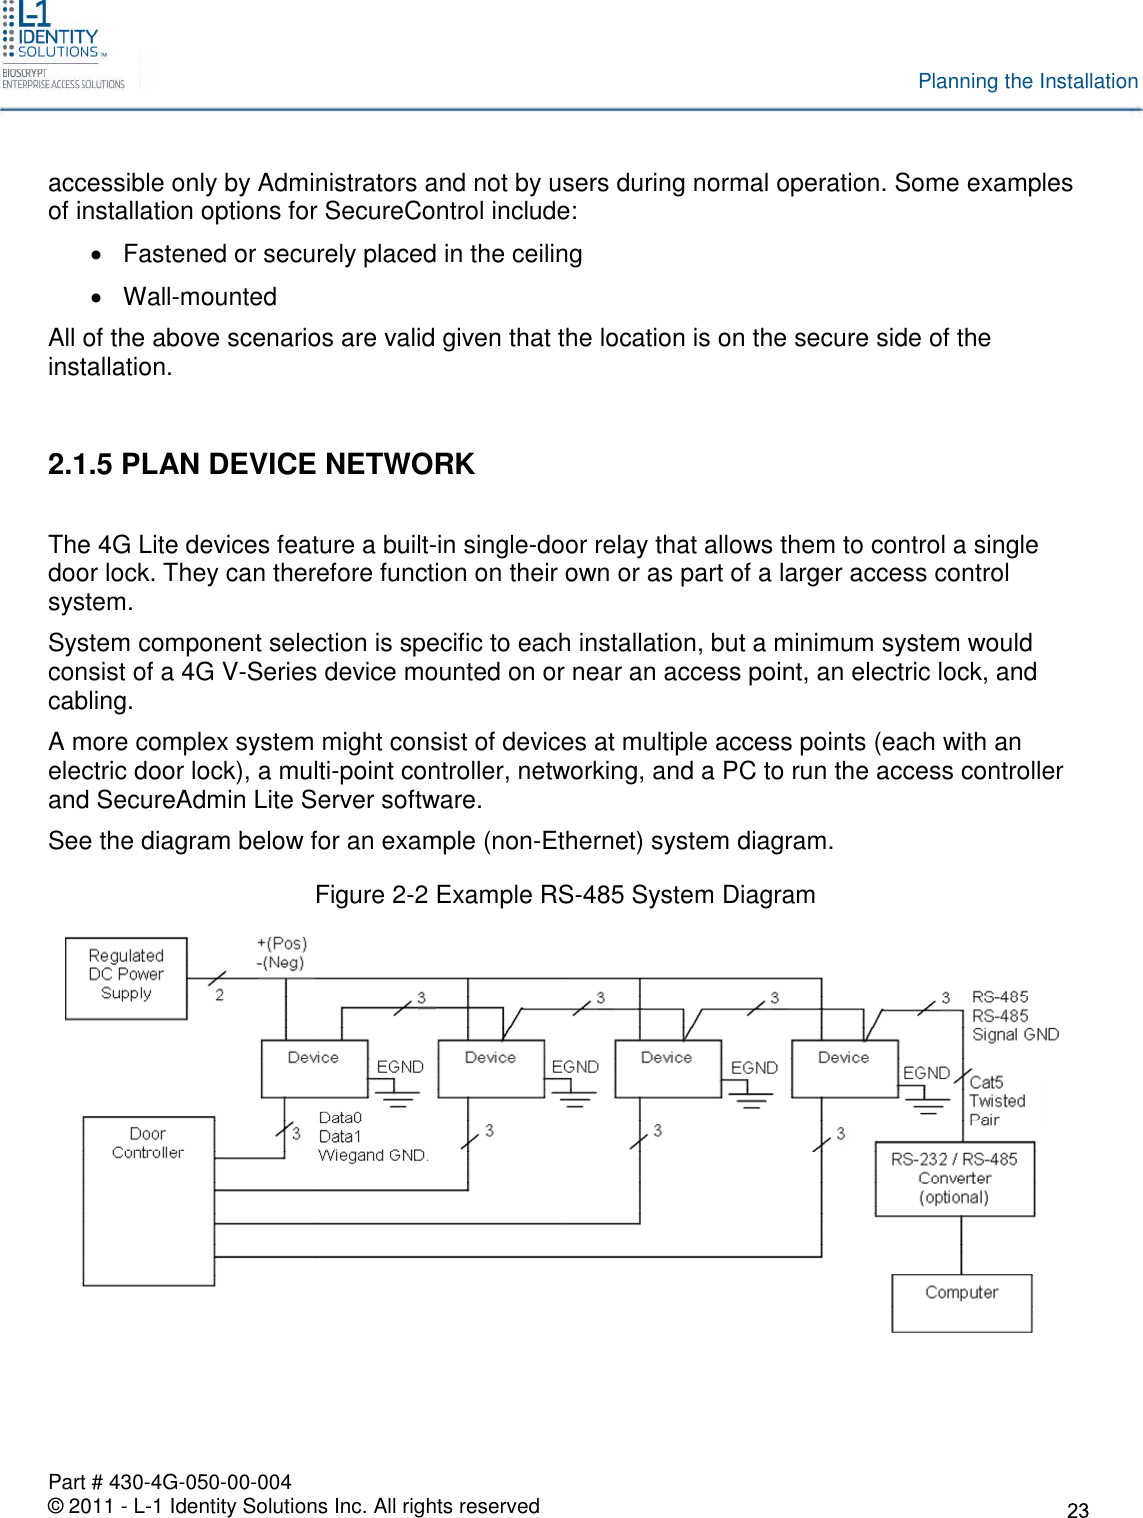 Part # 430-4G-050-00-004© 2011 - L-1 Identity Solutions Inc. All rights reservedPlanning the Installationaccessible only by Administrators and not by users during normal operation. Some examplesof installation options for SecureControl include:Fastened or securely placed in the ceilingWall-mountedAll of the above scenarios are valid given that the location is on the secure side of theinstallation.2.1.5 PLAN DEVICE NETWORKThe 4G Lite devices feature a built-in single-door relay that allows them to control a singledoor lock. They can therefore function on their own or as part of a larger access controlsystem.System component selection is specific to each installation, but a minimum system wouldconsist of a 4G V-Series device mounted on or near an access point, an electric lock, andcabling.A more complex system might consist of devices at multiple access points (each with anelectric door lock), a multi-point controller, networking, and a PC to run the access controllerand SecureAdmin Lite Server software.See the diagram below for an example (non-Ethernet) system diagram.Figure 2-2 Example RS-485 System Diagram